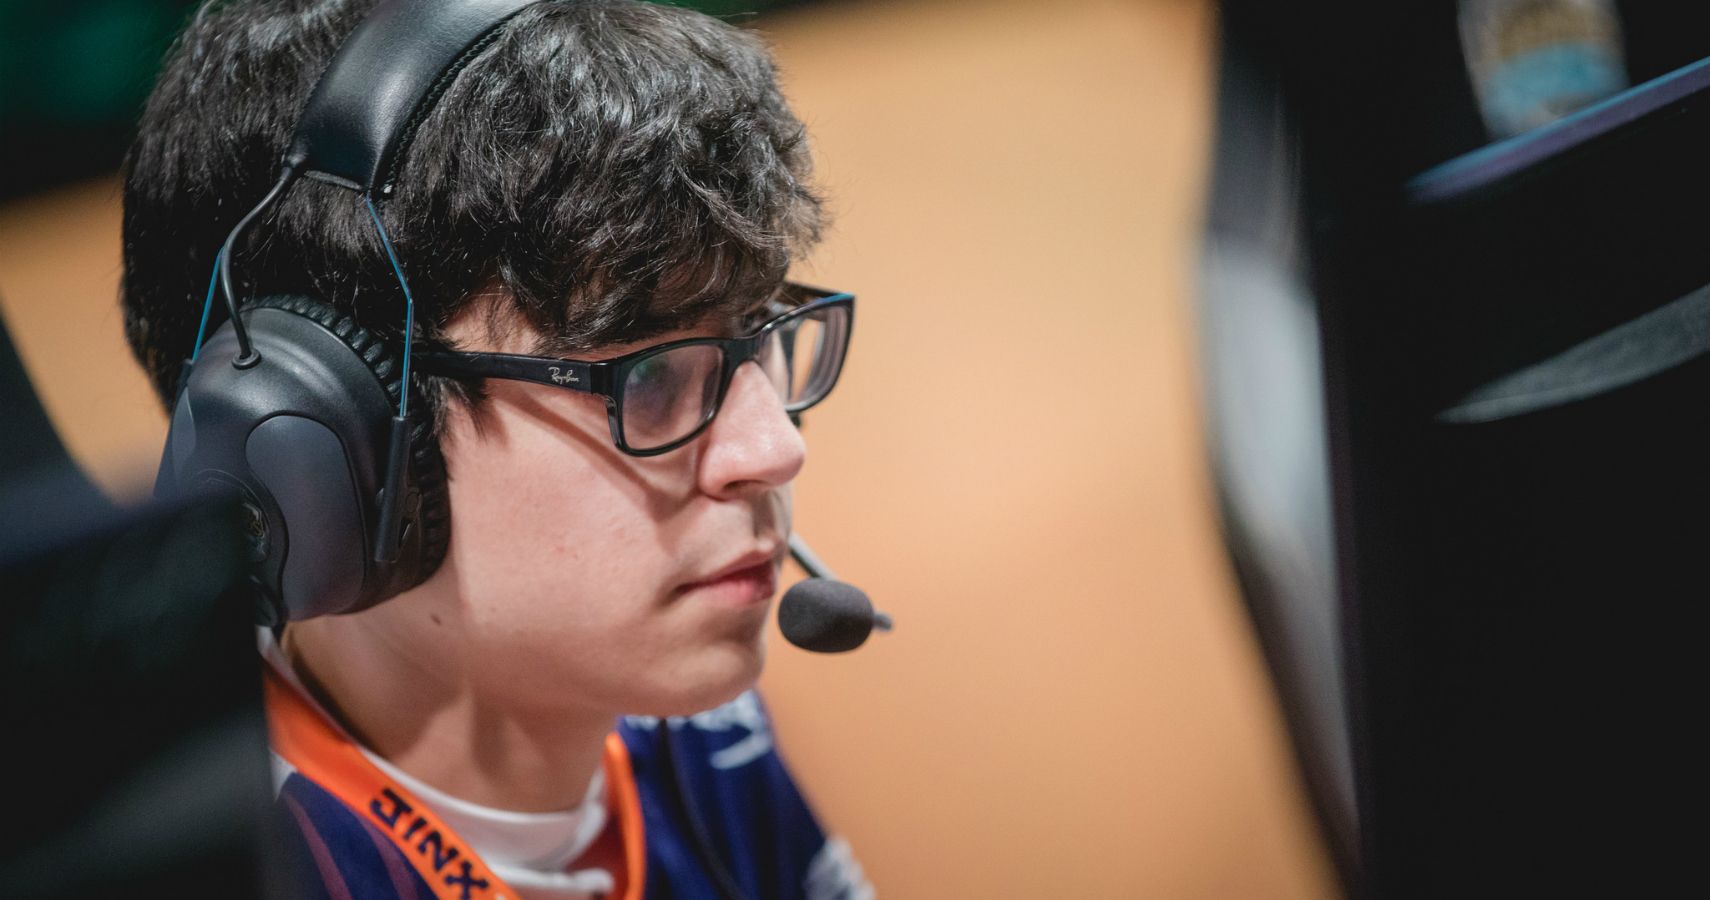 Breaking Down The Crazy Few Days of League of Legends Roster Moves